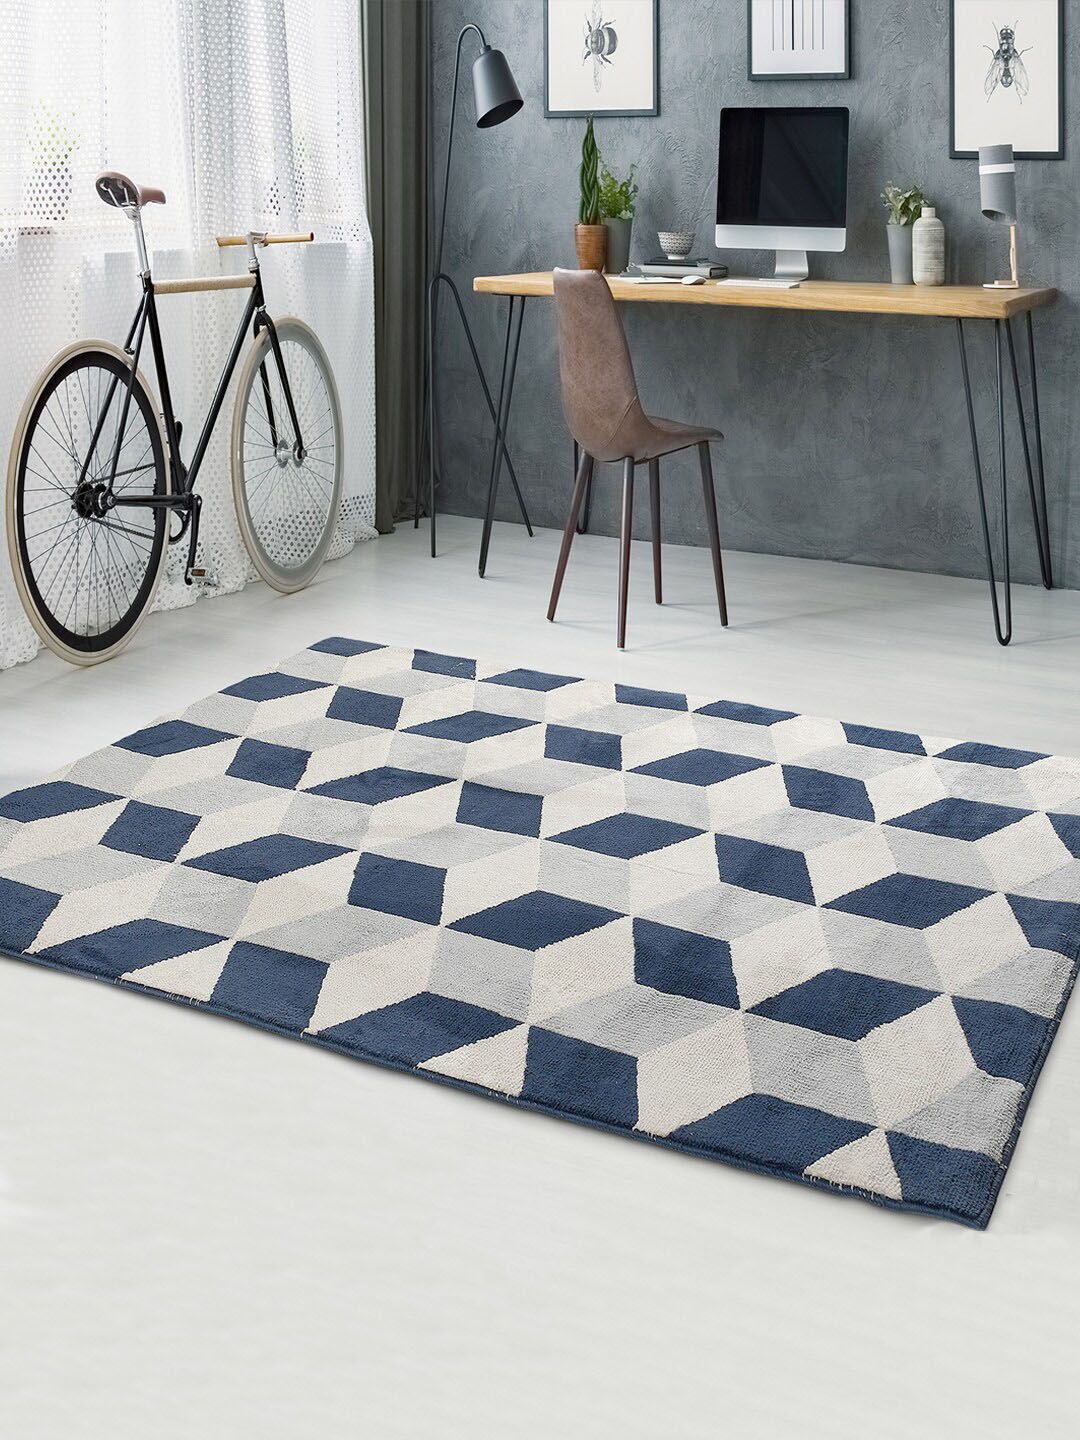 Saral Home Blue & Off White Geometric Cotton Carpet Price in India